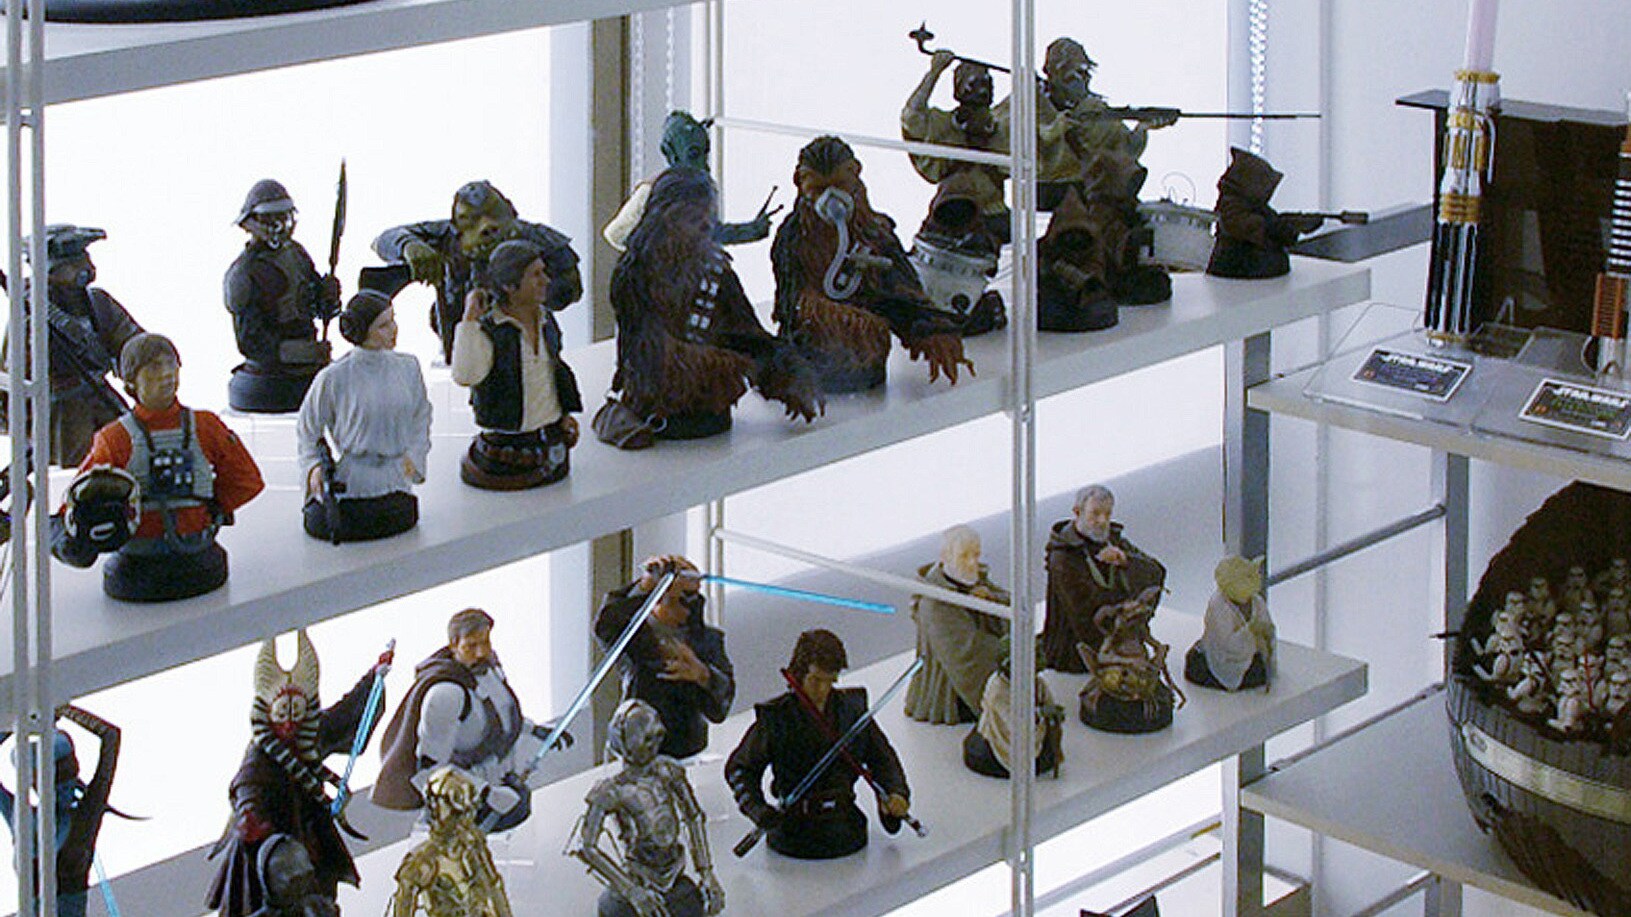 Cho Woong - Star Wars collection: Star Wars props and collectibles